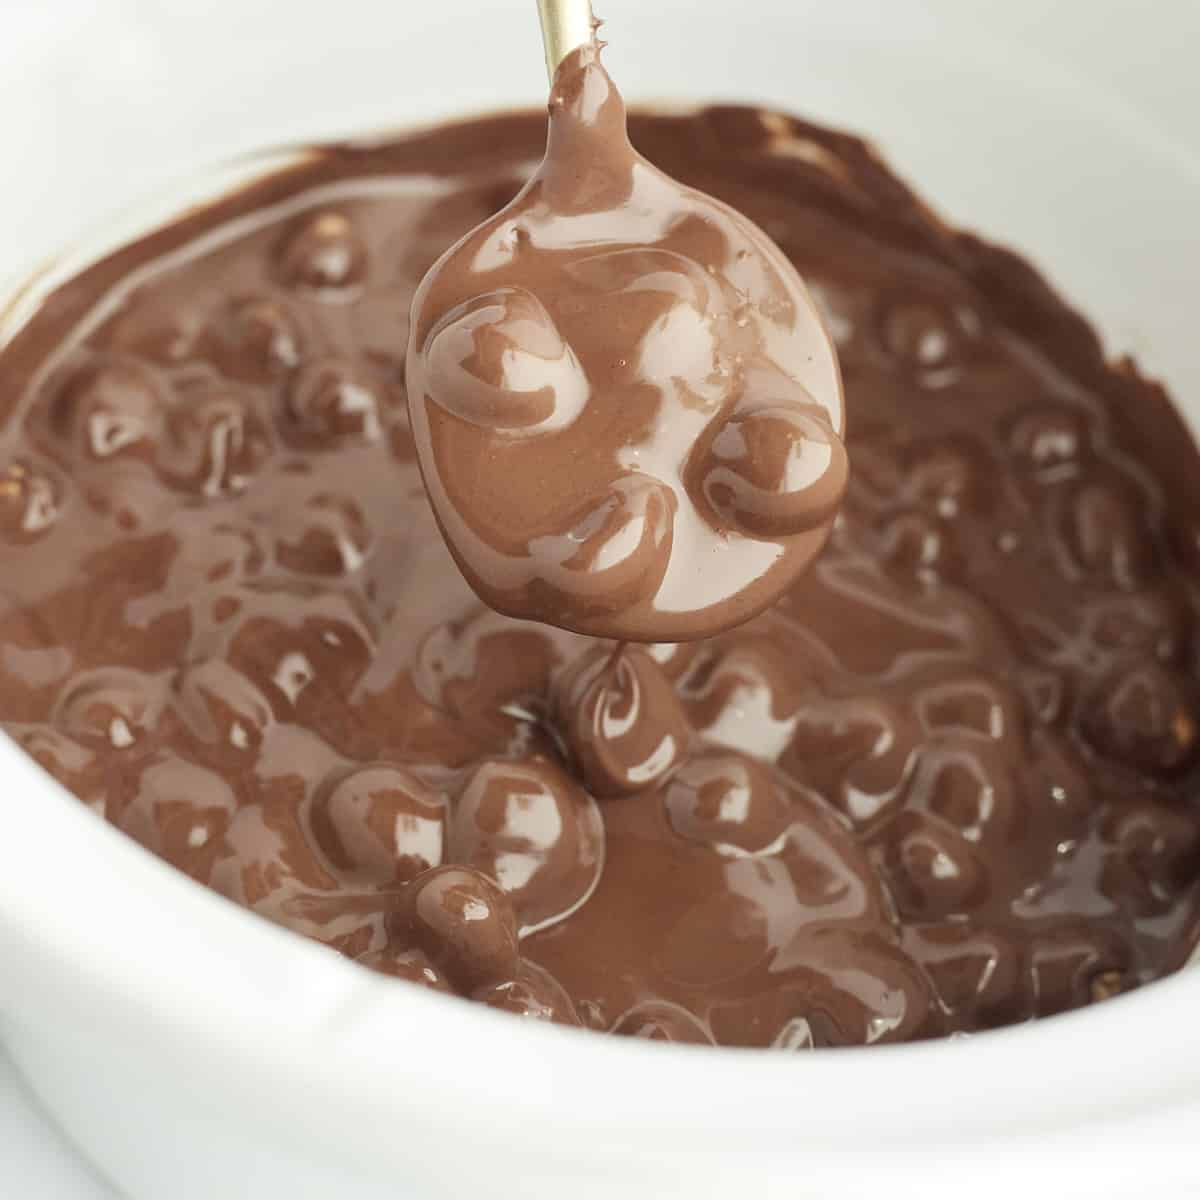 melted chocolate and hazelnuts with a spoon lifting a bite